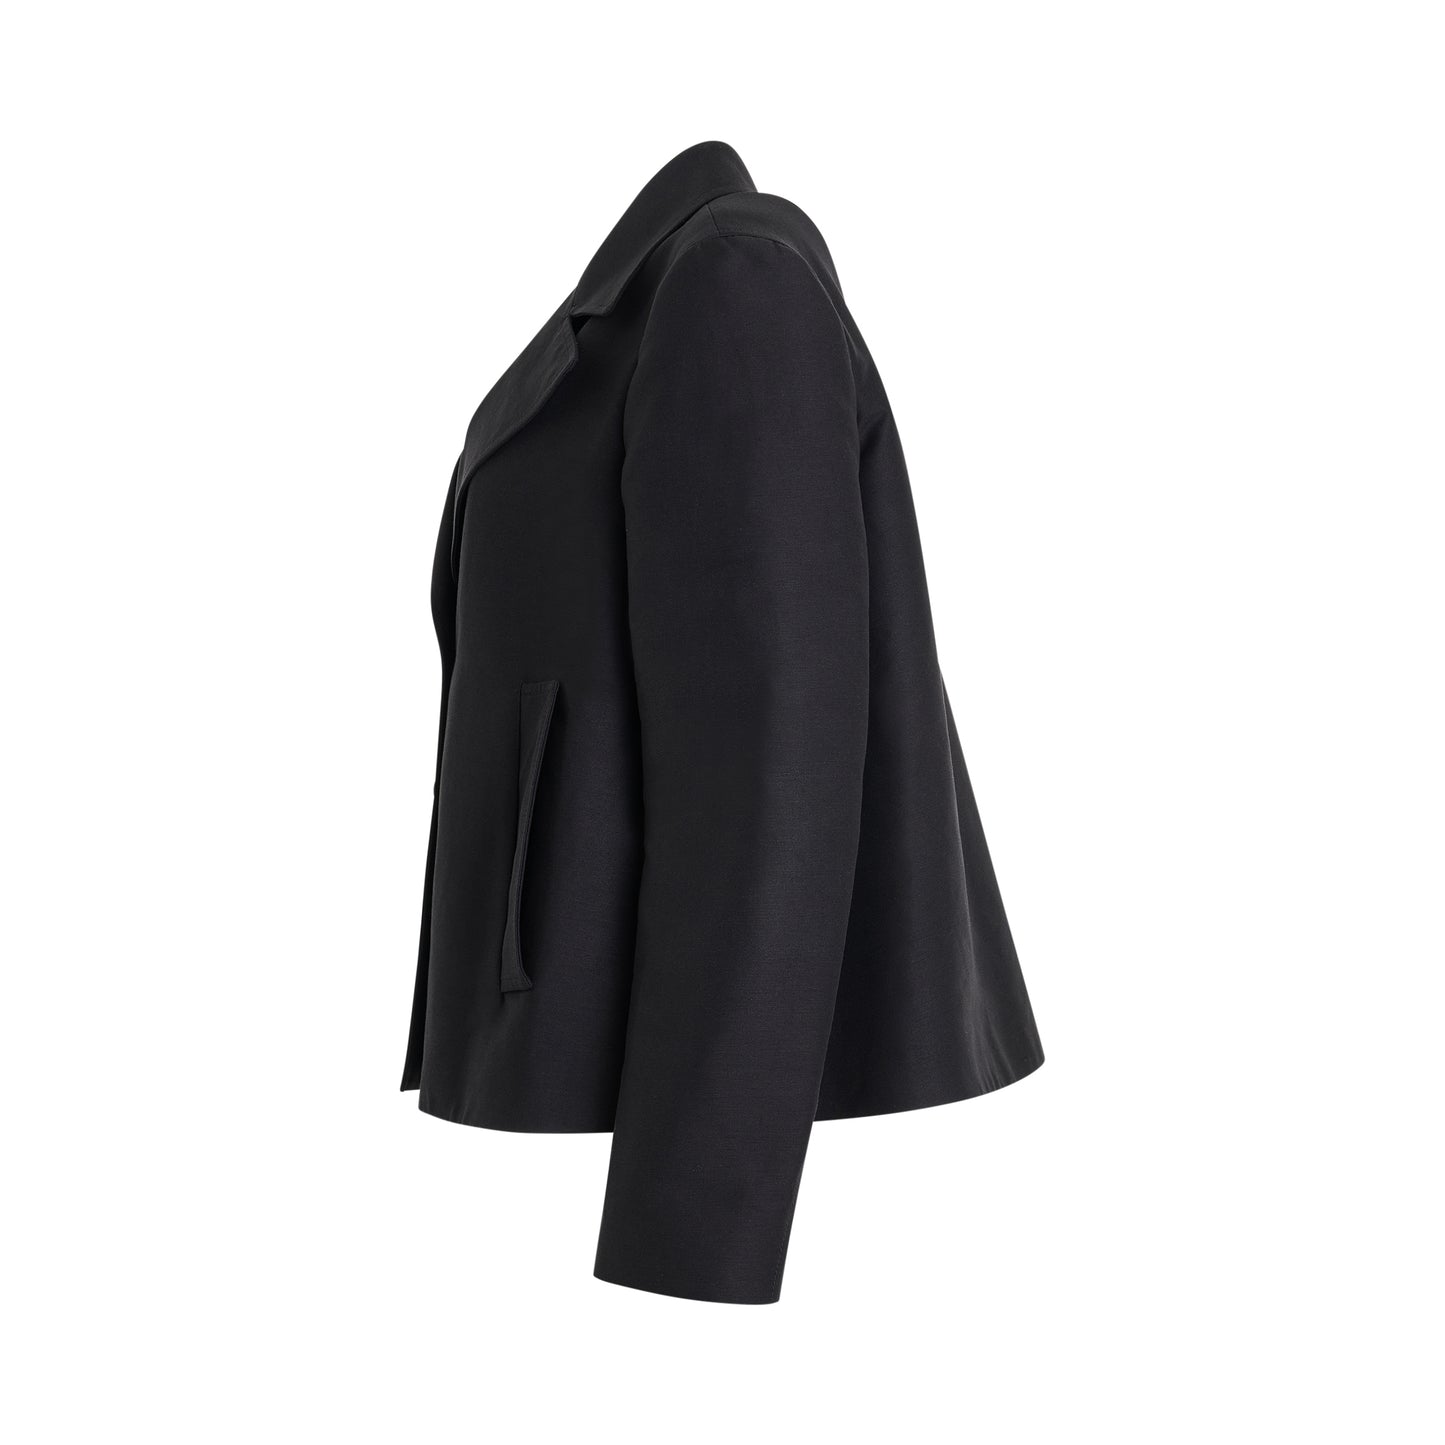 3 Button Flared Jacket in Black